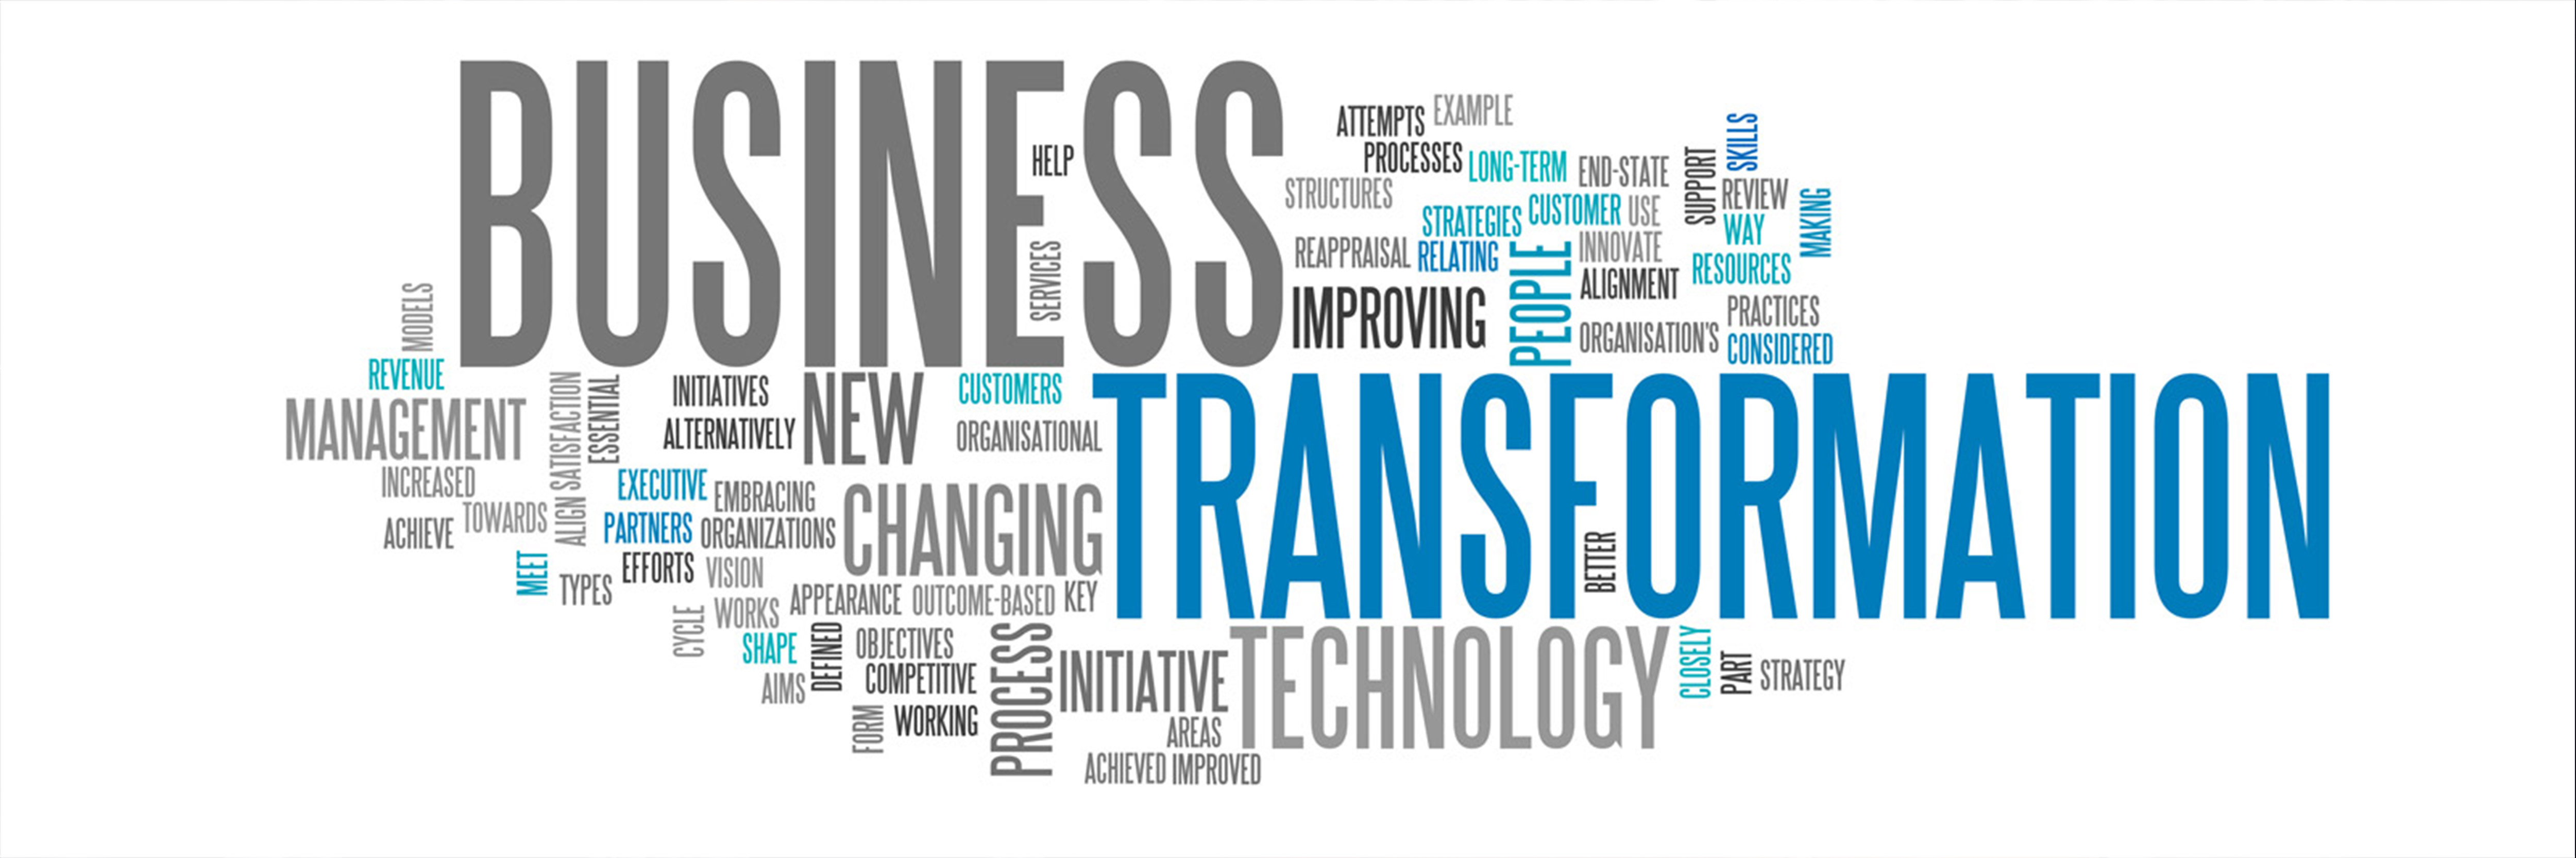 business transformation word cloud